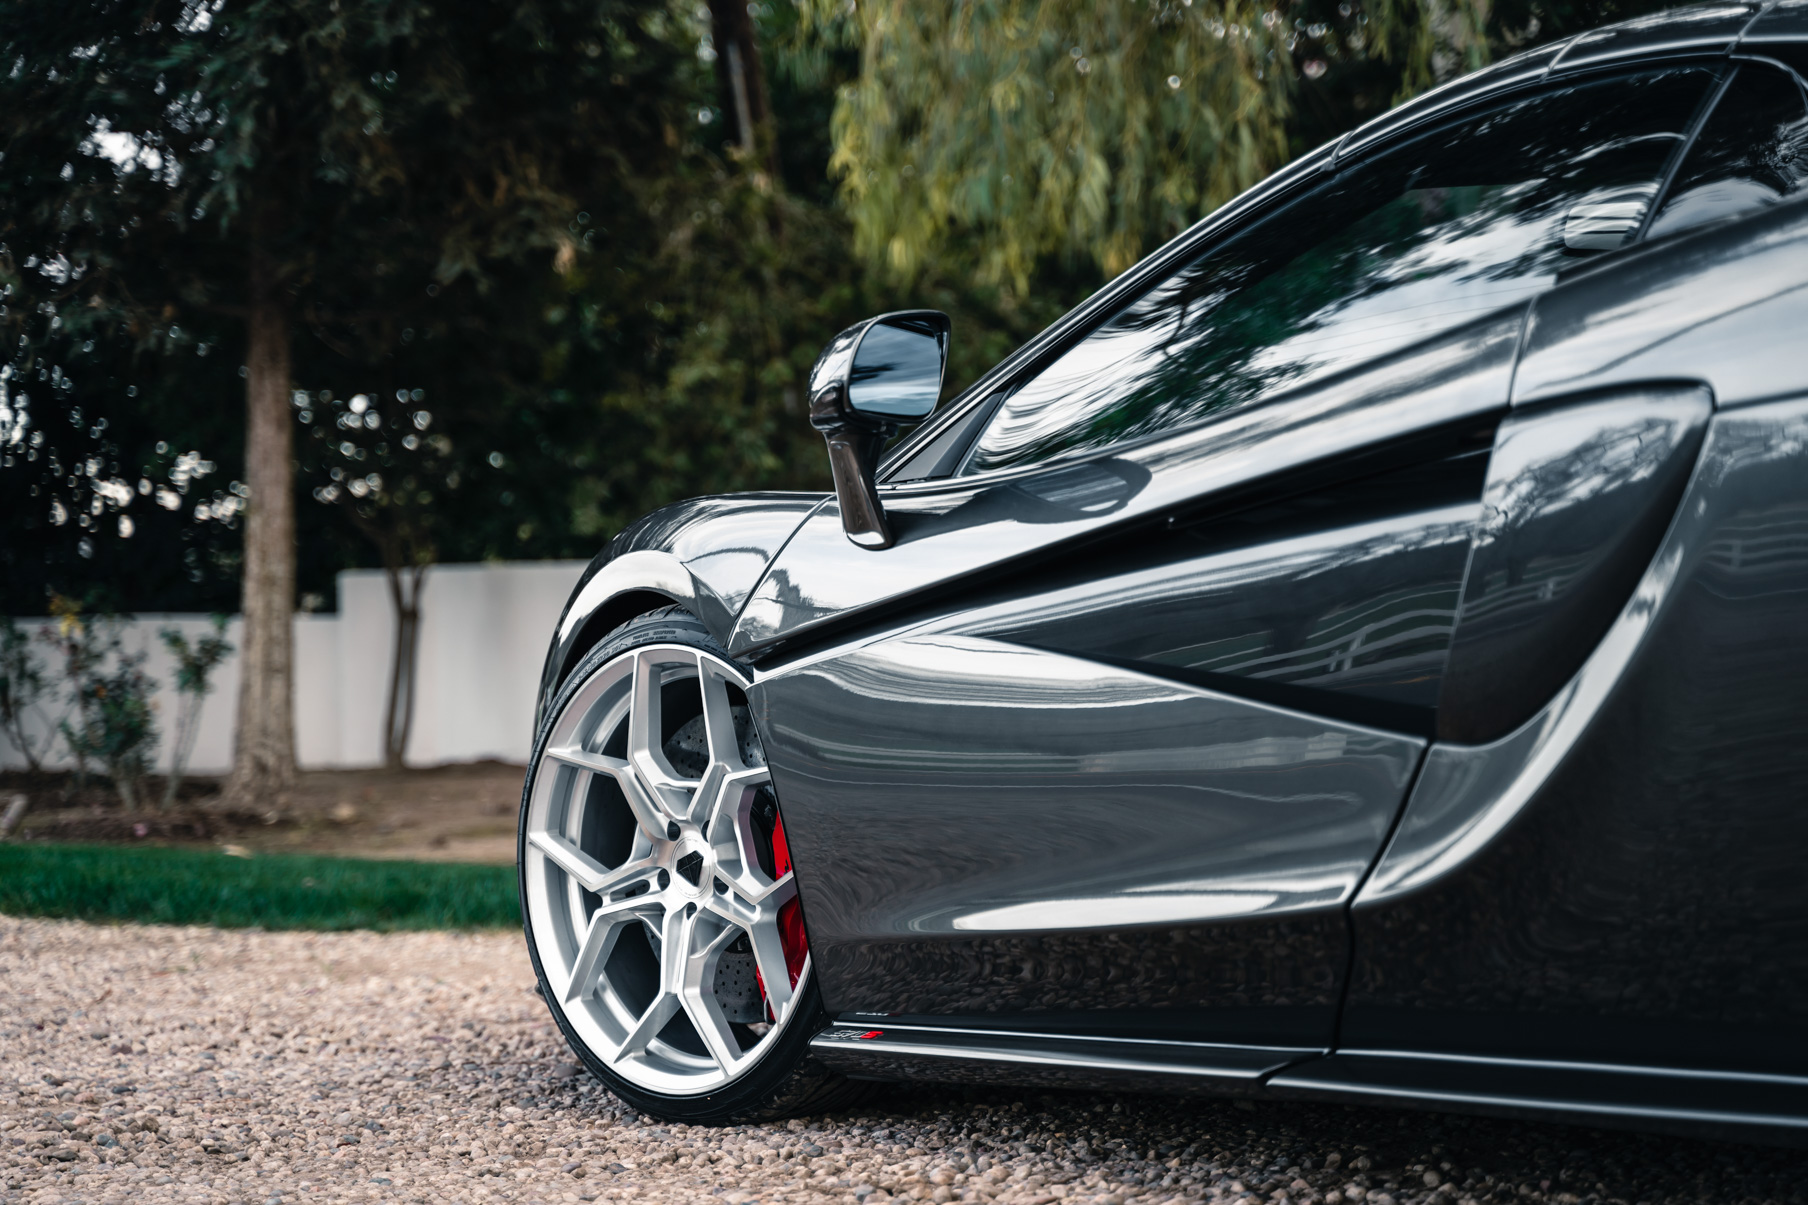 A 2019 McLaren 570s on 20 Inch Blaque Diamond BD-F25 Brushed Silver Wheels